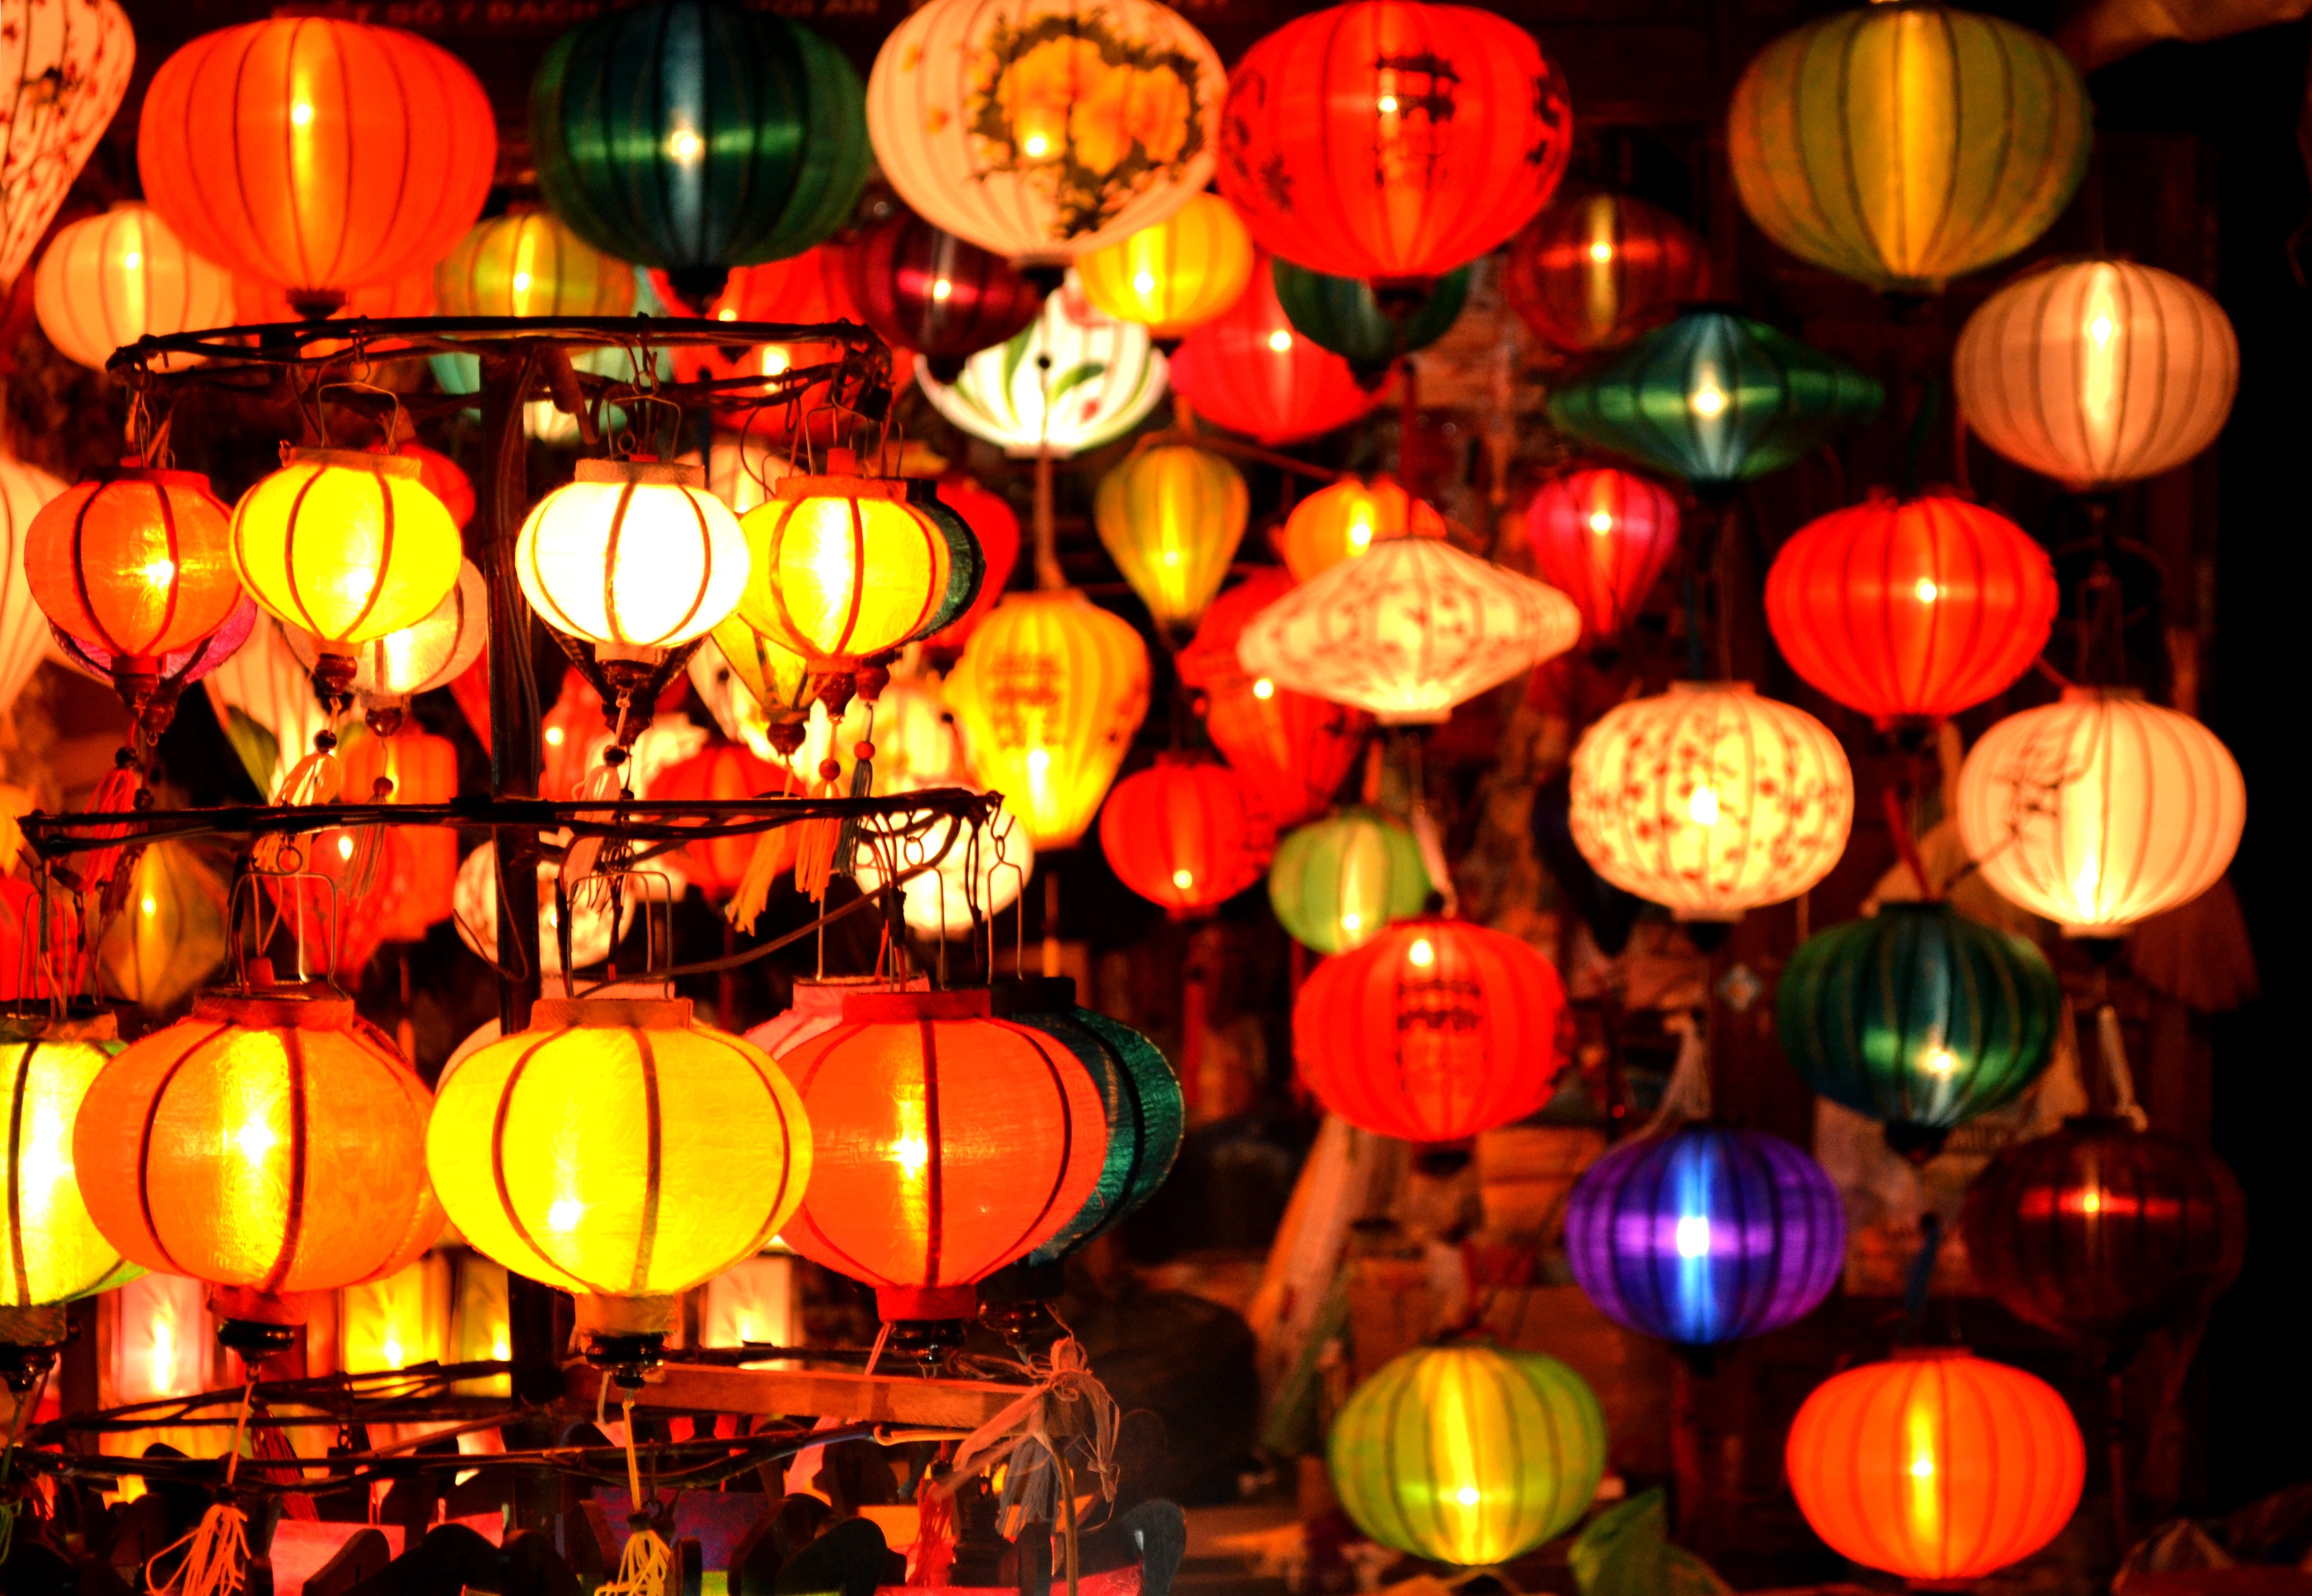 Hoi An History: A Bittersweet Combination of Everything